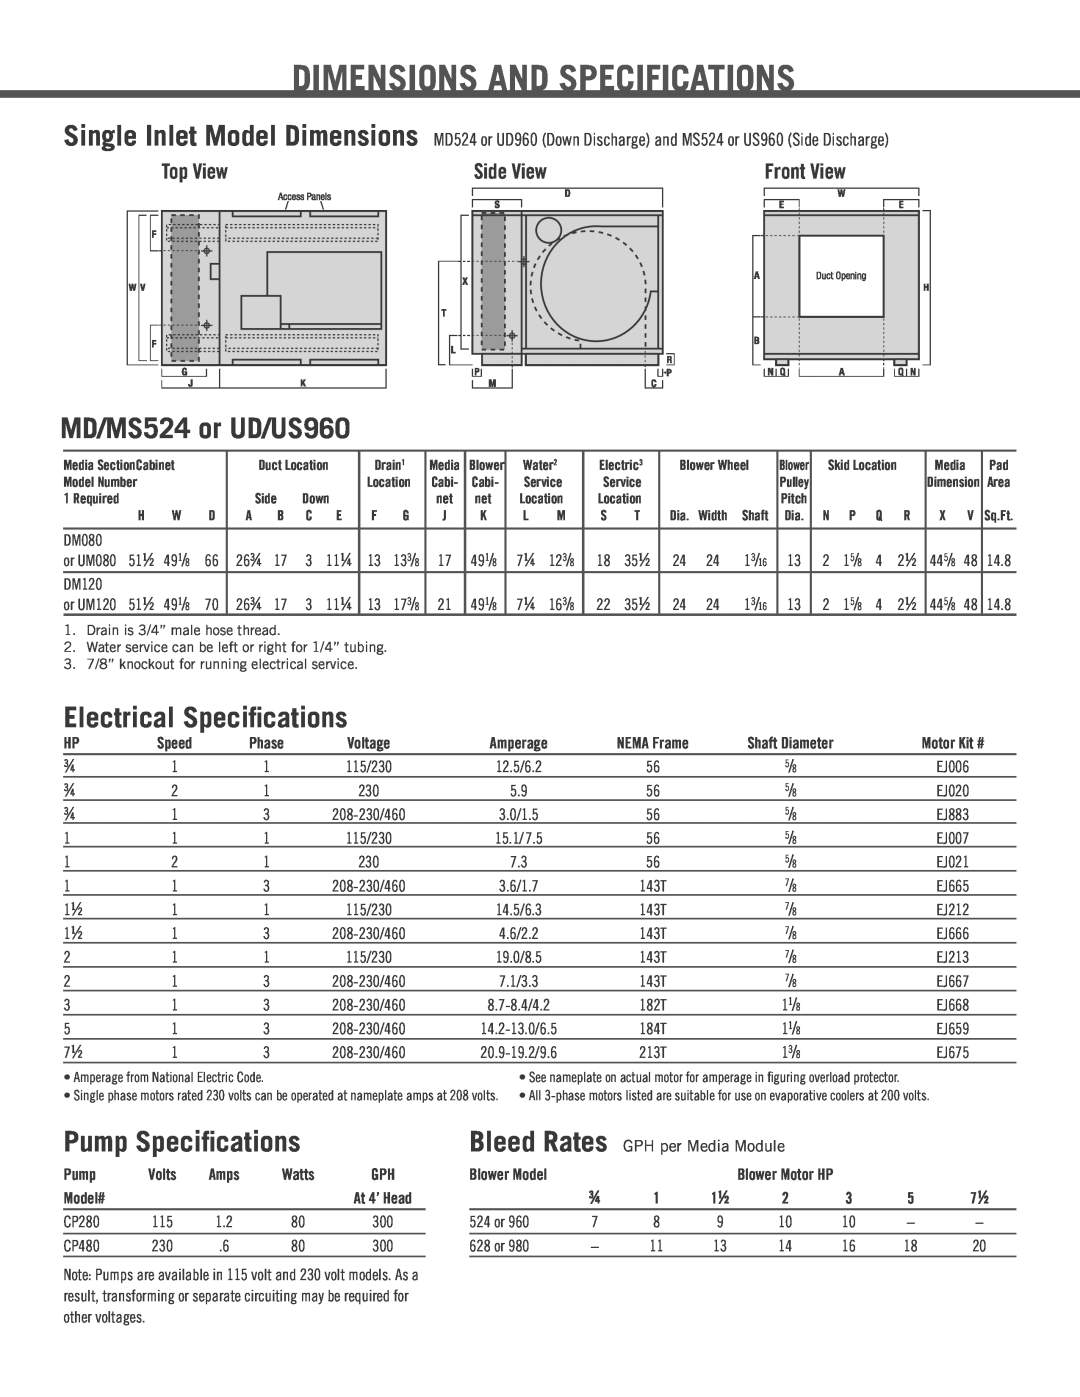 AdobeAir Dimensions And Specifications, MD/MS524 or UD/US960, Electrical Speciﬁcations, Pump Speciﬁcations, Top View 